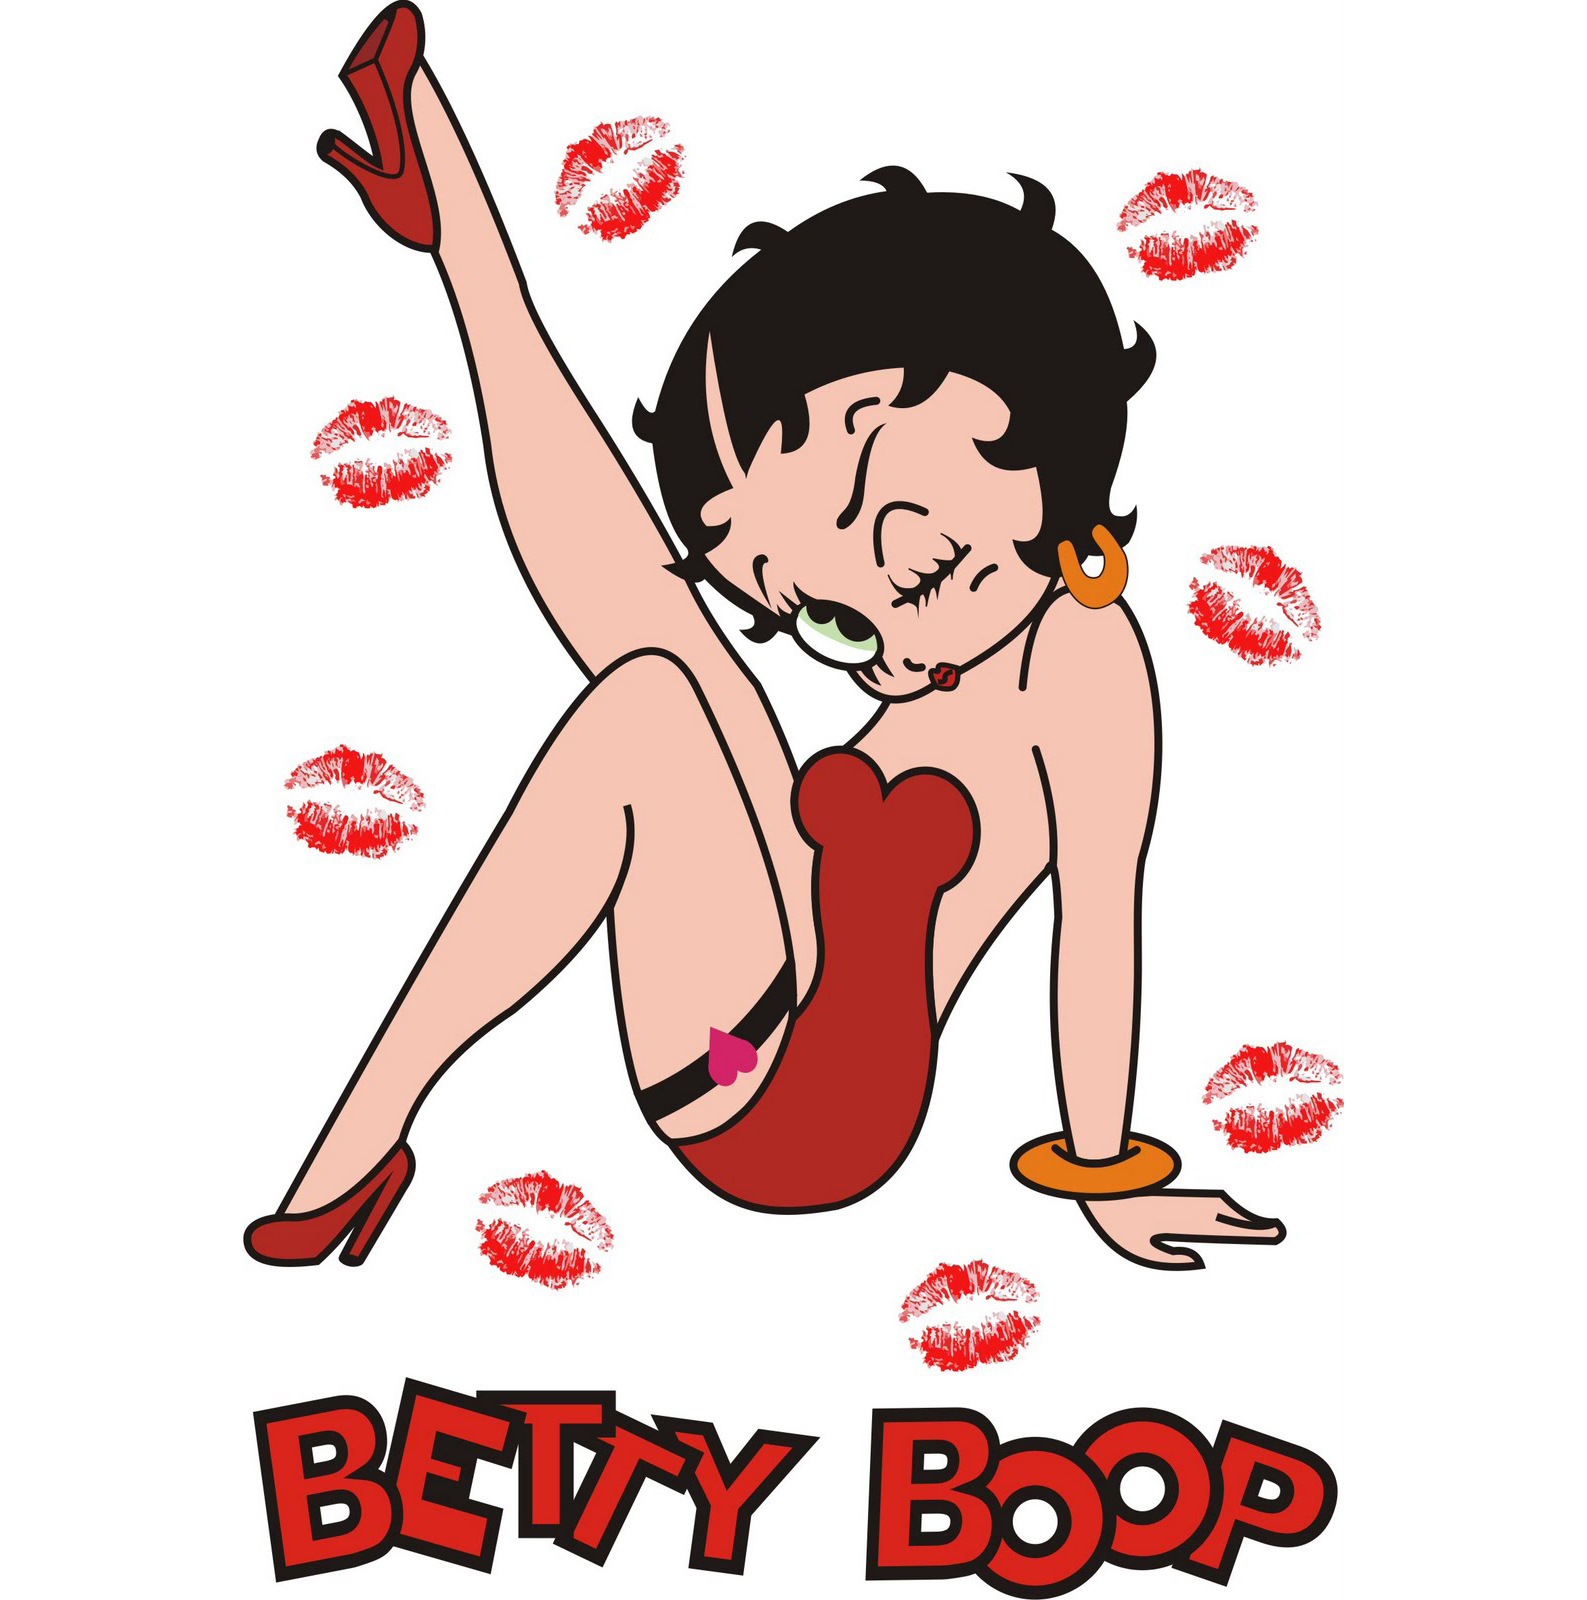 Black Betty Boop Quotes.